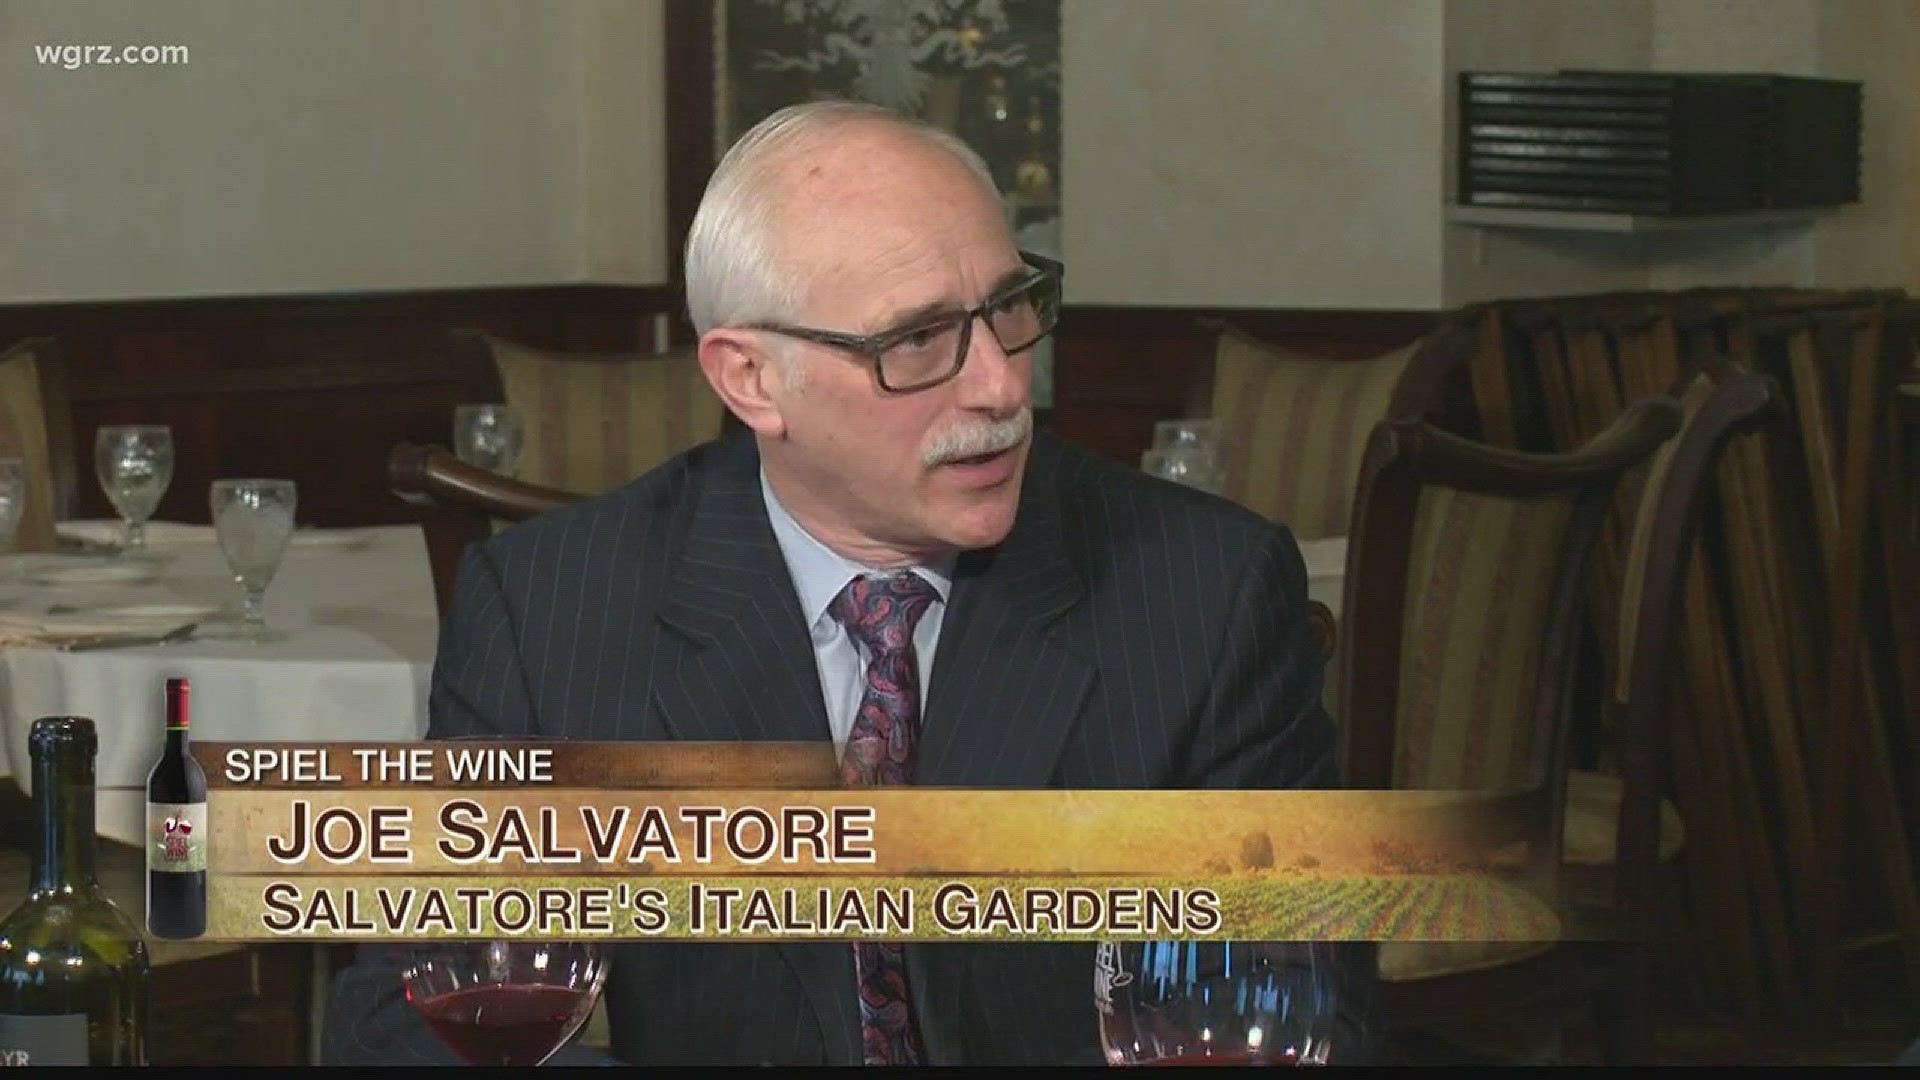 Kevin is joined by Joe Salvatore of Salvatore's Italian Gardens